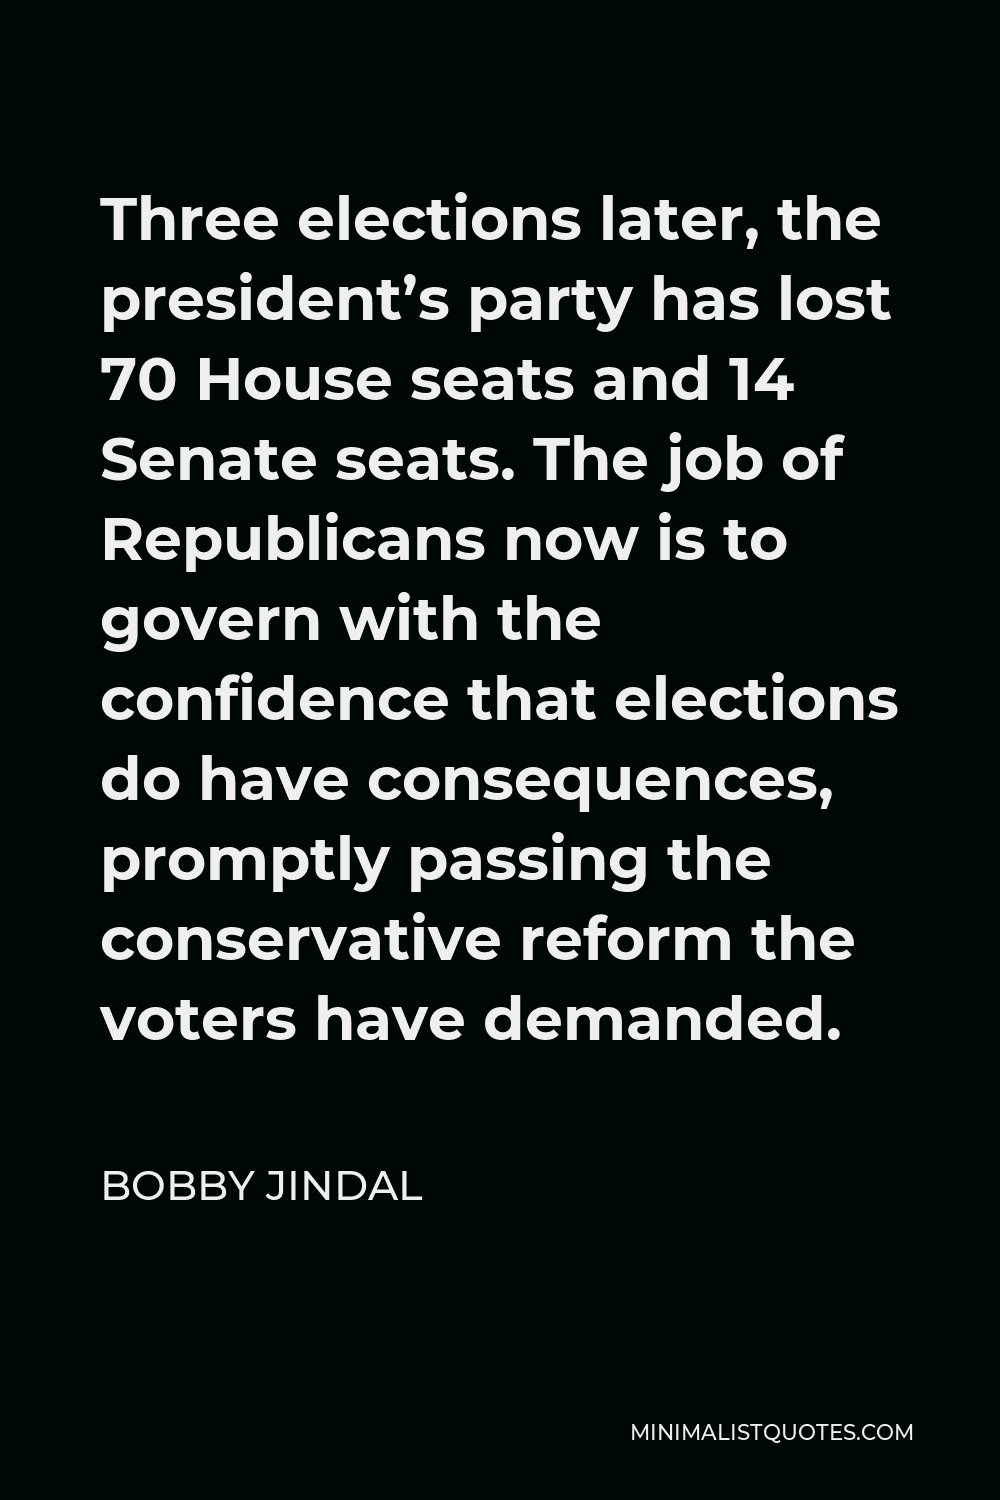 Bobby Jindal Quote - Three elections later, the president’s party has lost 70 House seats and 14 Senate seats. The job of Republicans now is to govern with the confidence that elections do have consequences, promptly passing the conservative reform the voters have demanded.